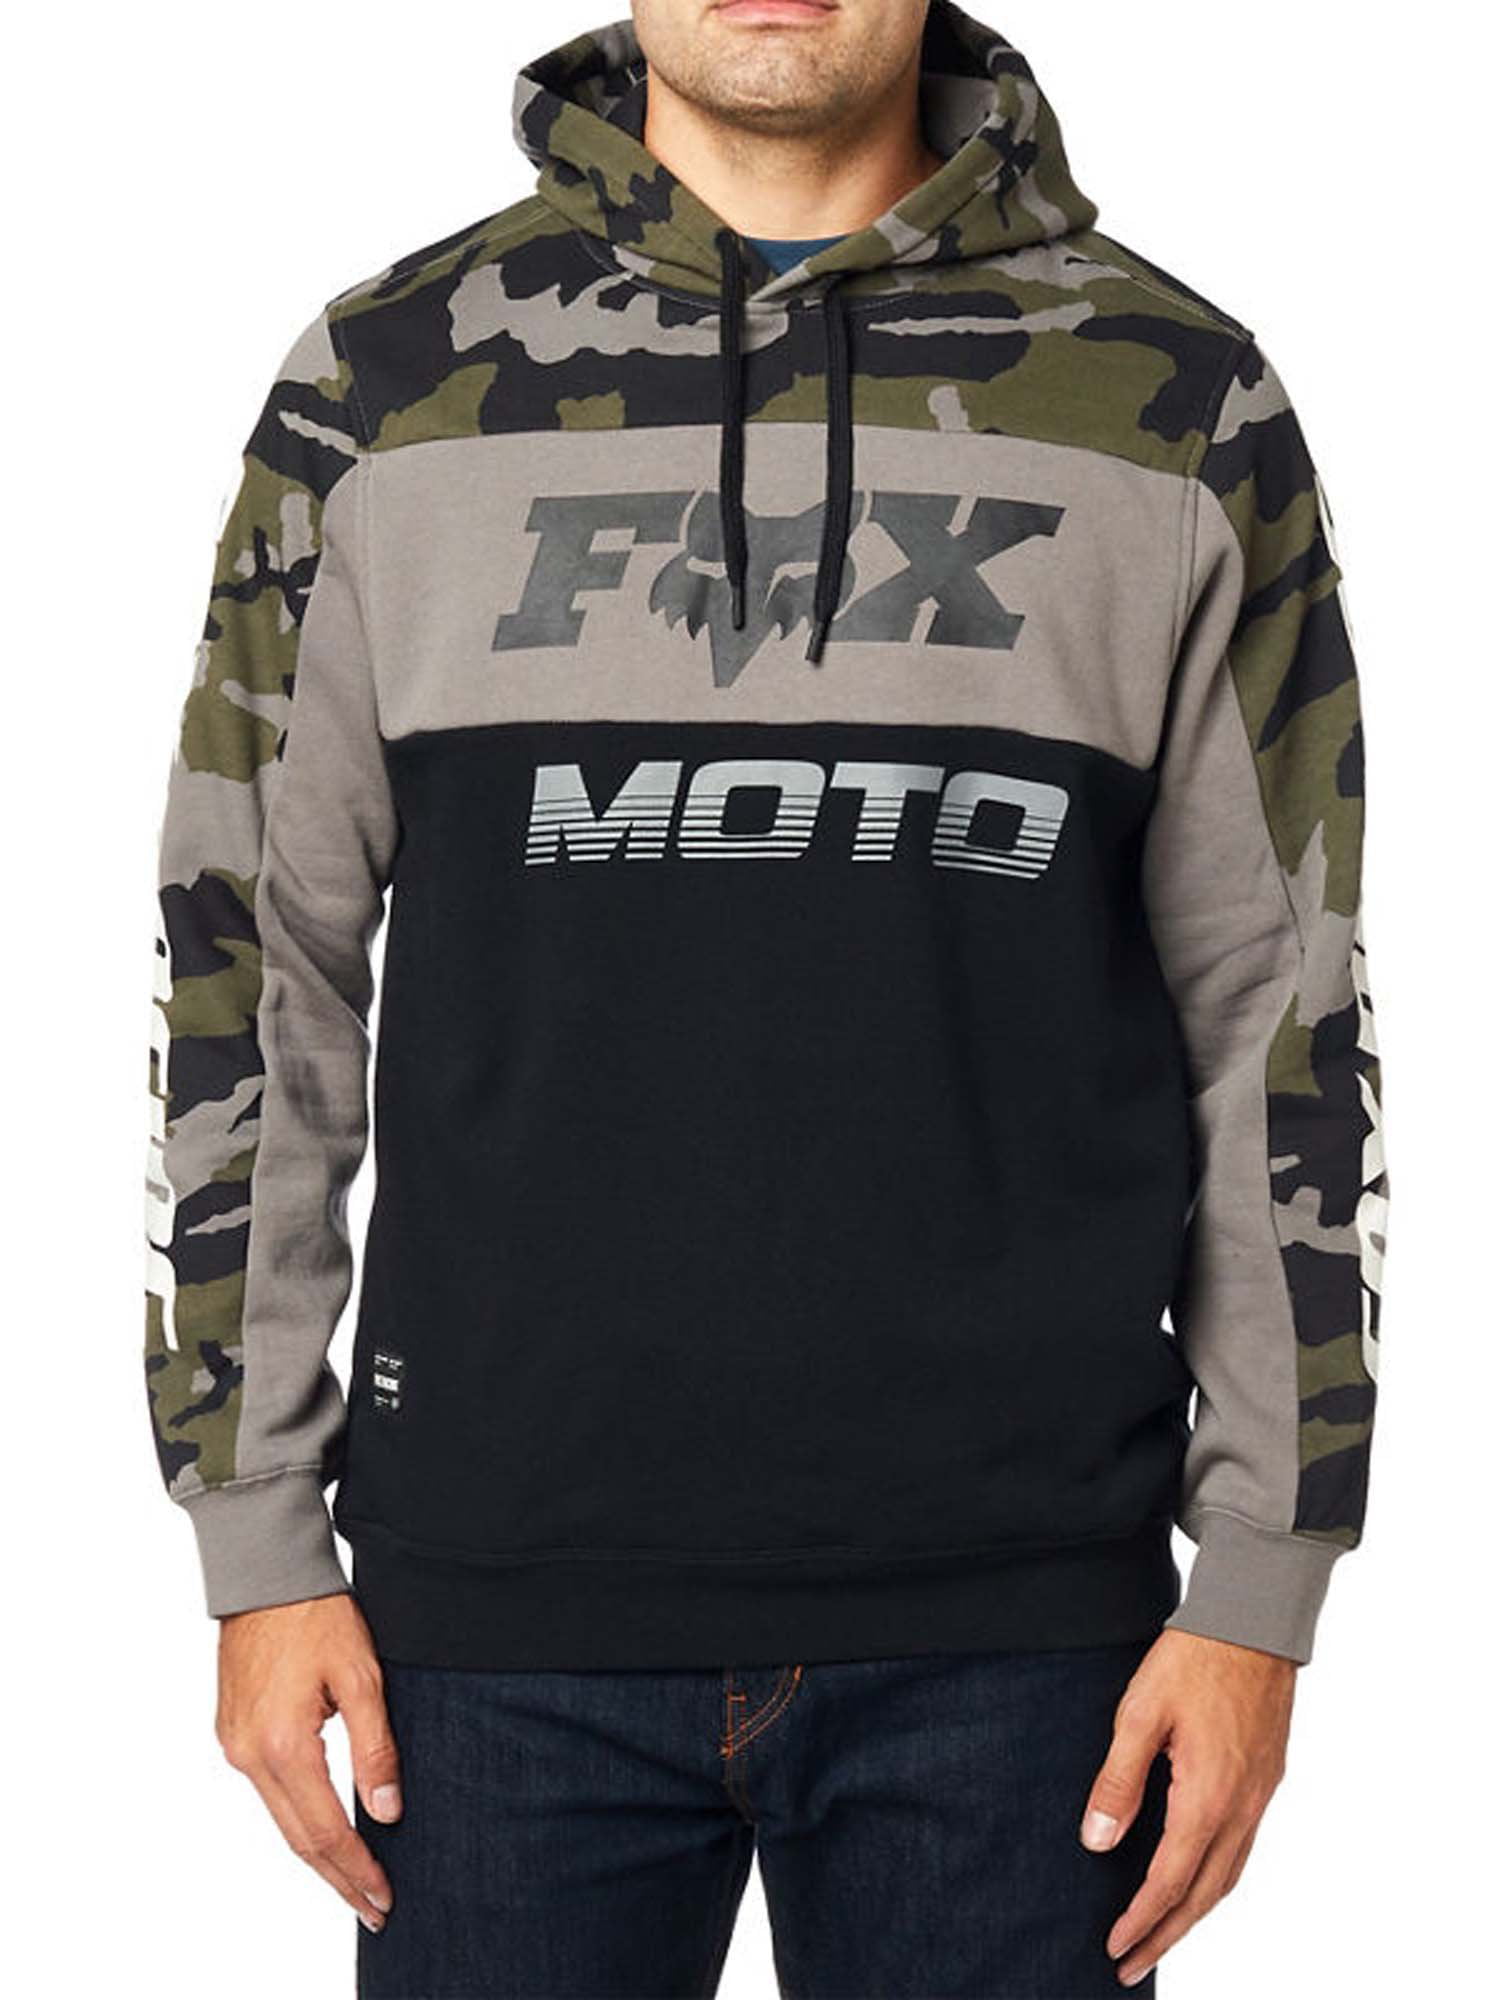 New F0.x Racing Go Fox Men and Women Full Printing Hoodie 3D Size S To 5XL